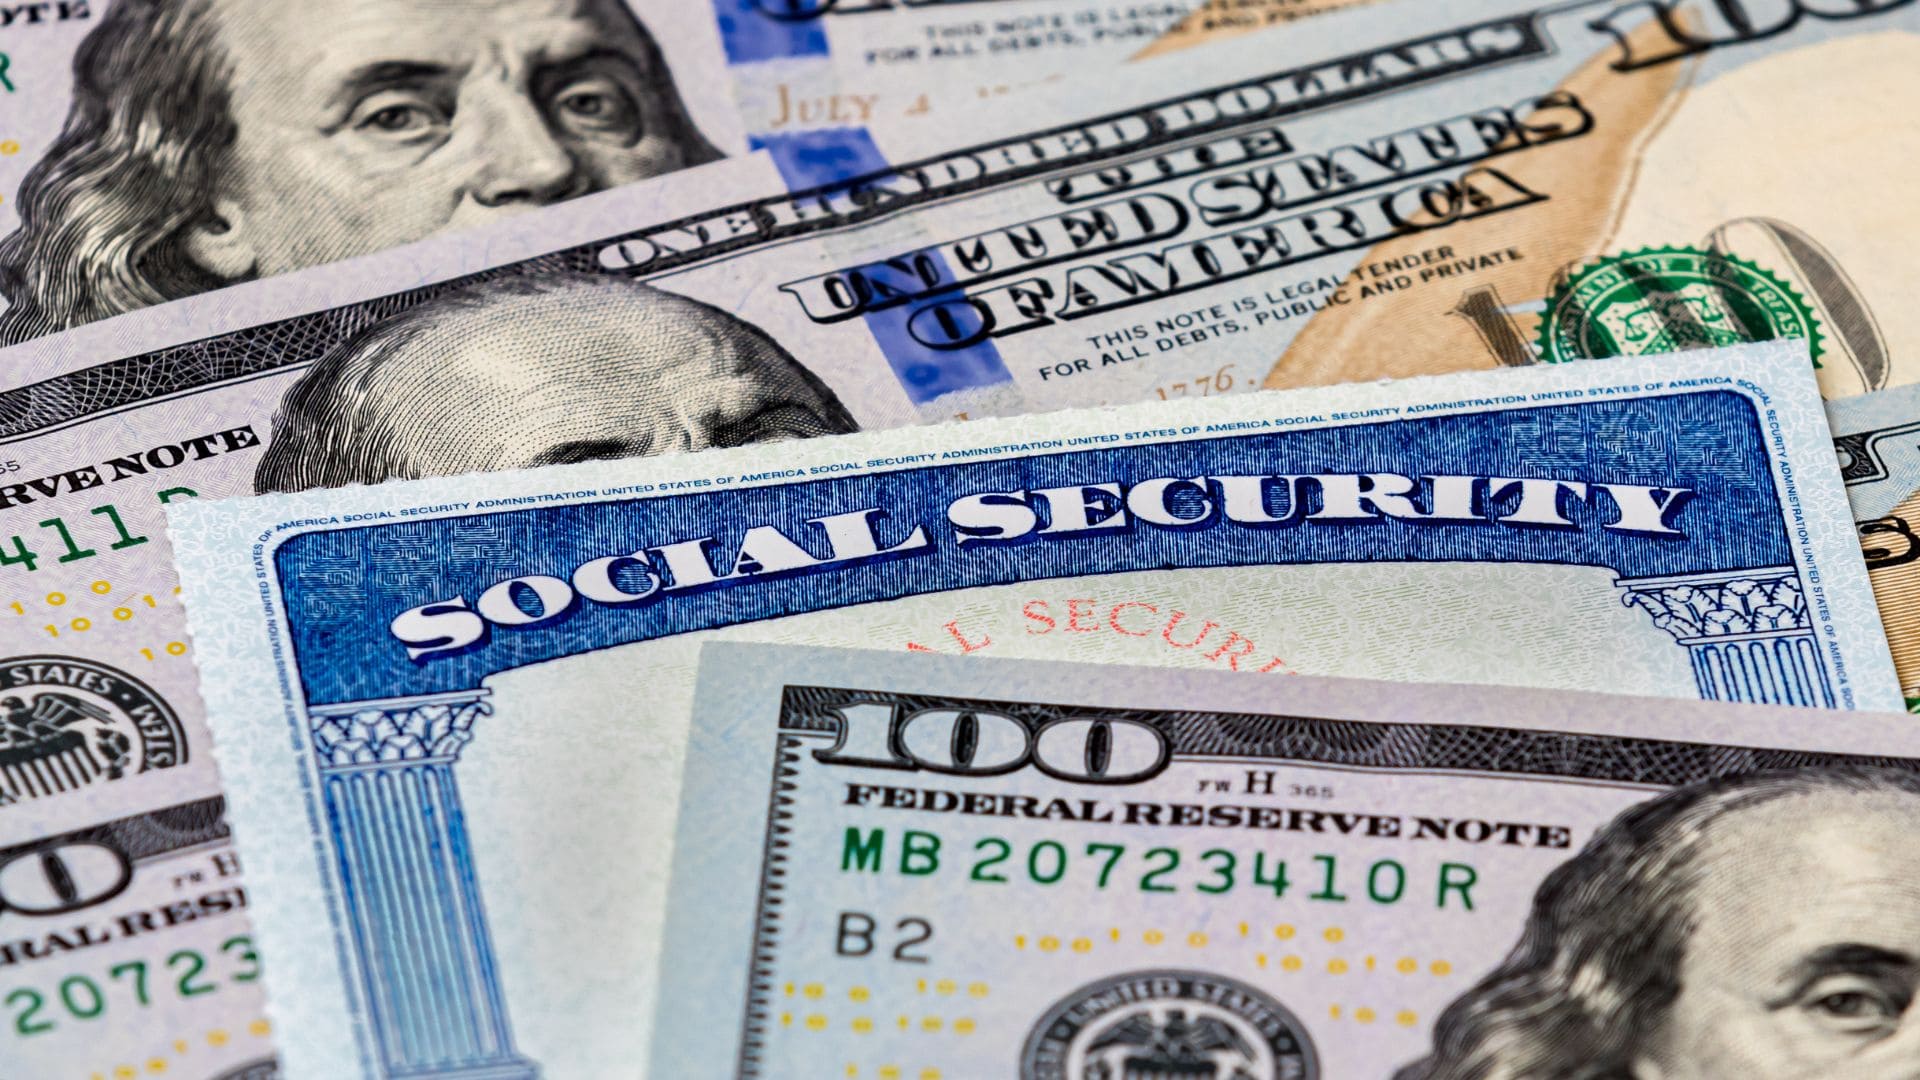 The next November Social Security payment has some requirements